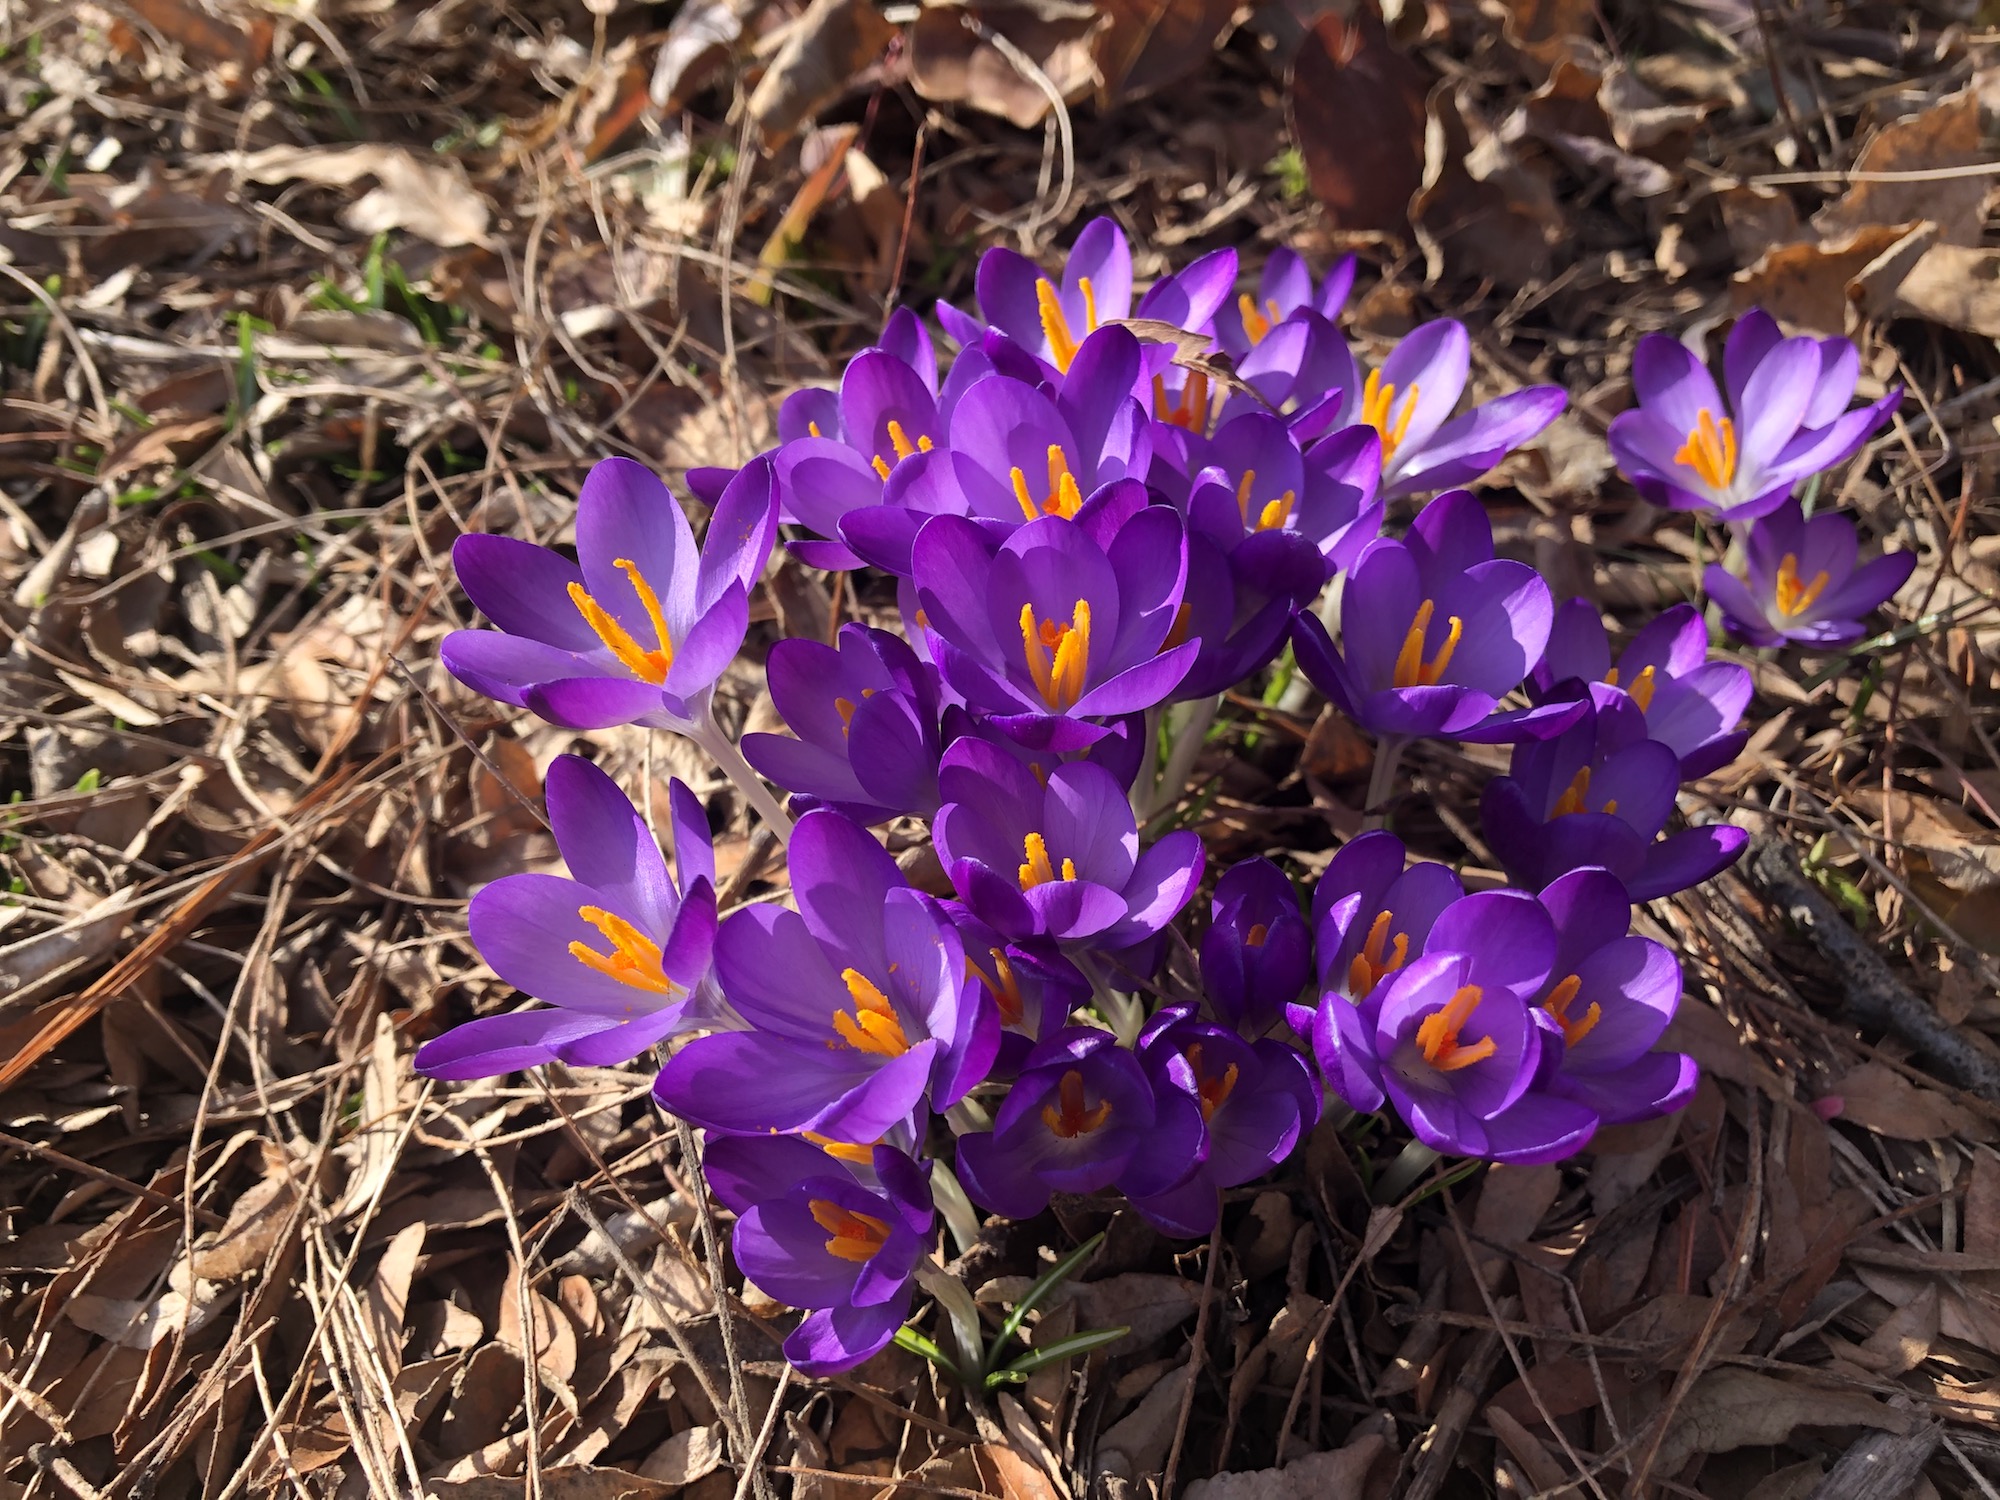 Crocus next to Thoreau Elementary wall on March 5, 2021.